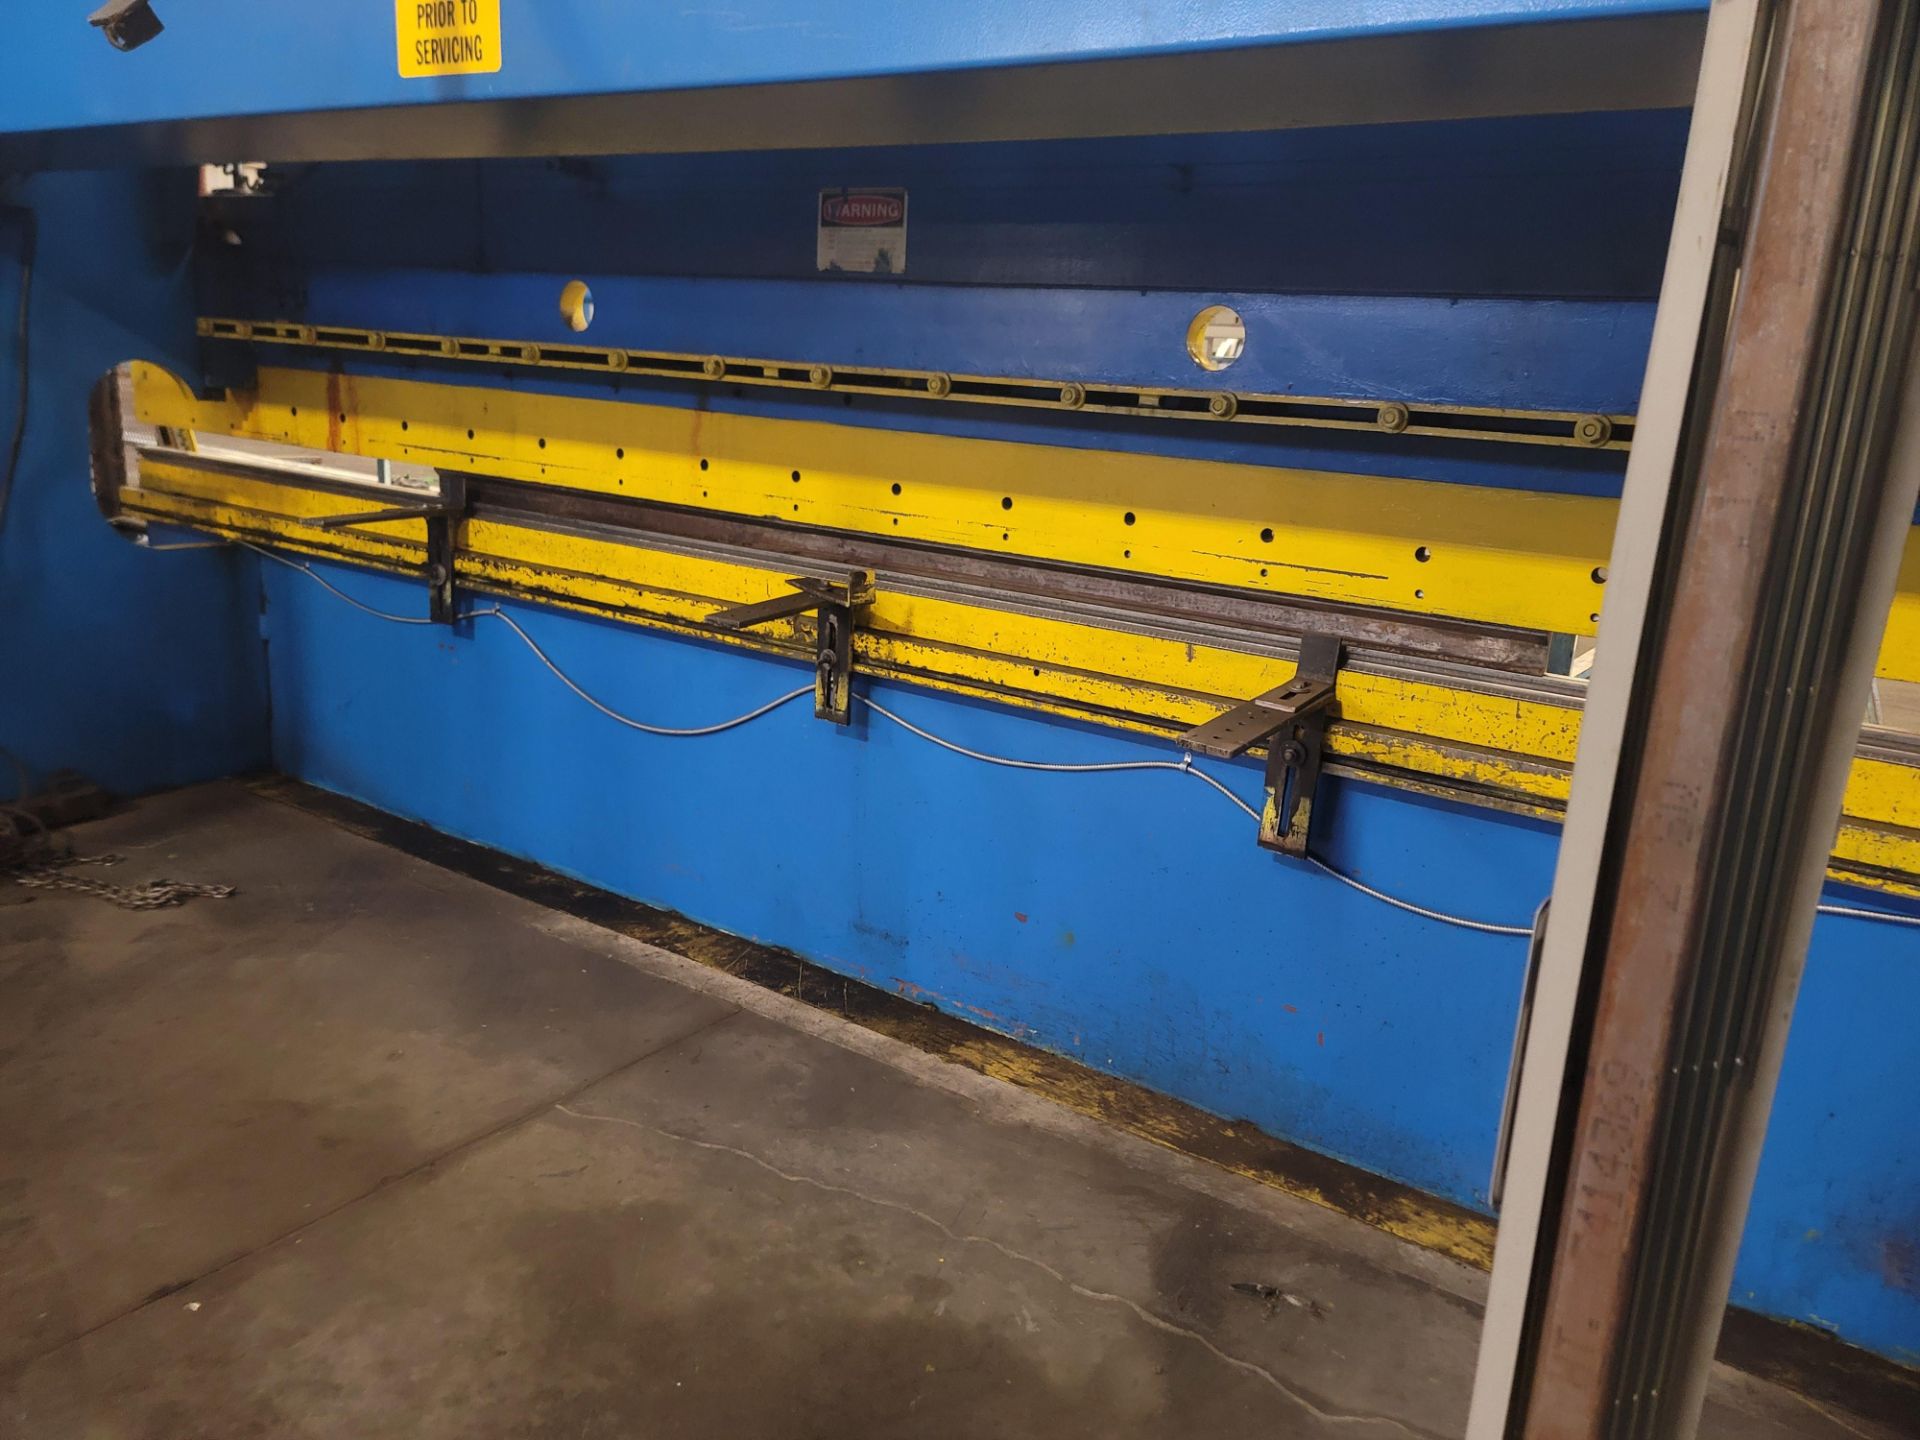 PACIFIC K175-21 PRESS BRAKE, 3/16" X 21', HYDRAULIC, PROTECH EAGLE EYE GUARDING SYSTEM, S/N 8902 - Image 10 of 12